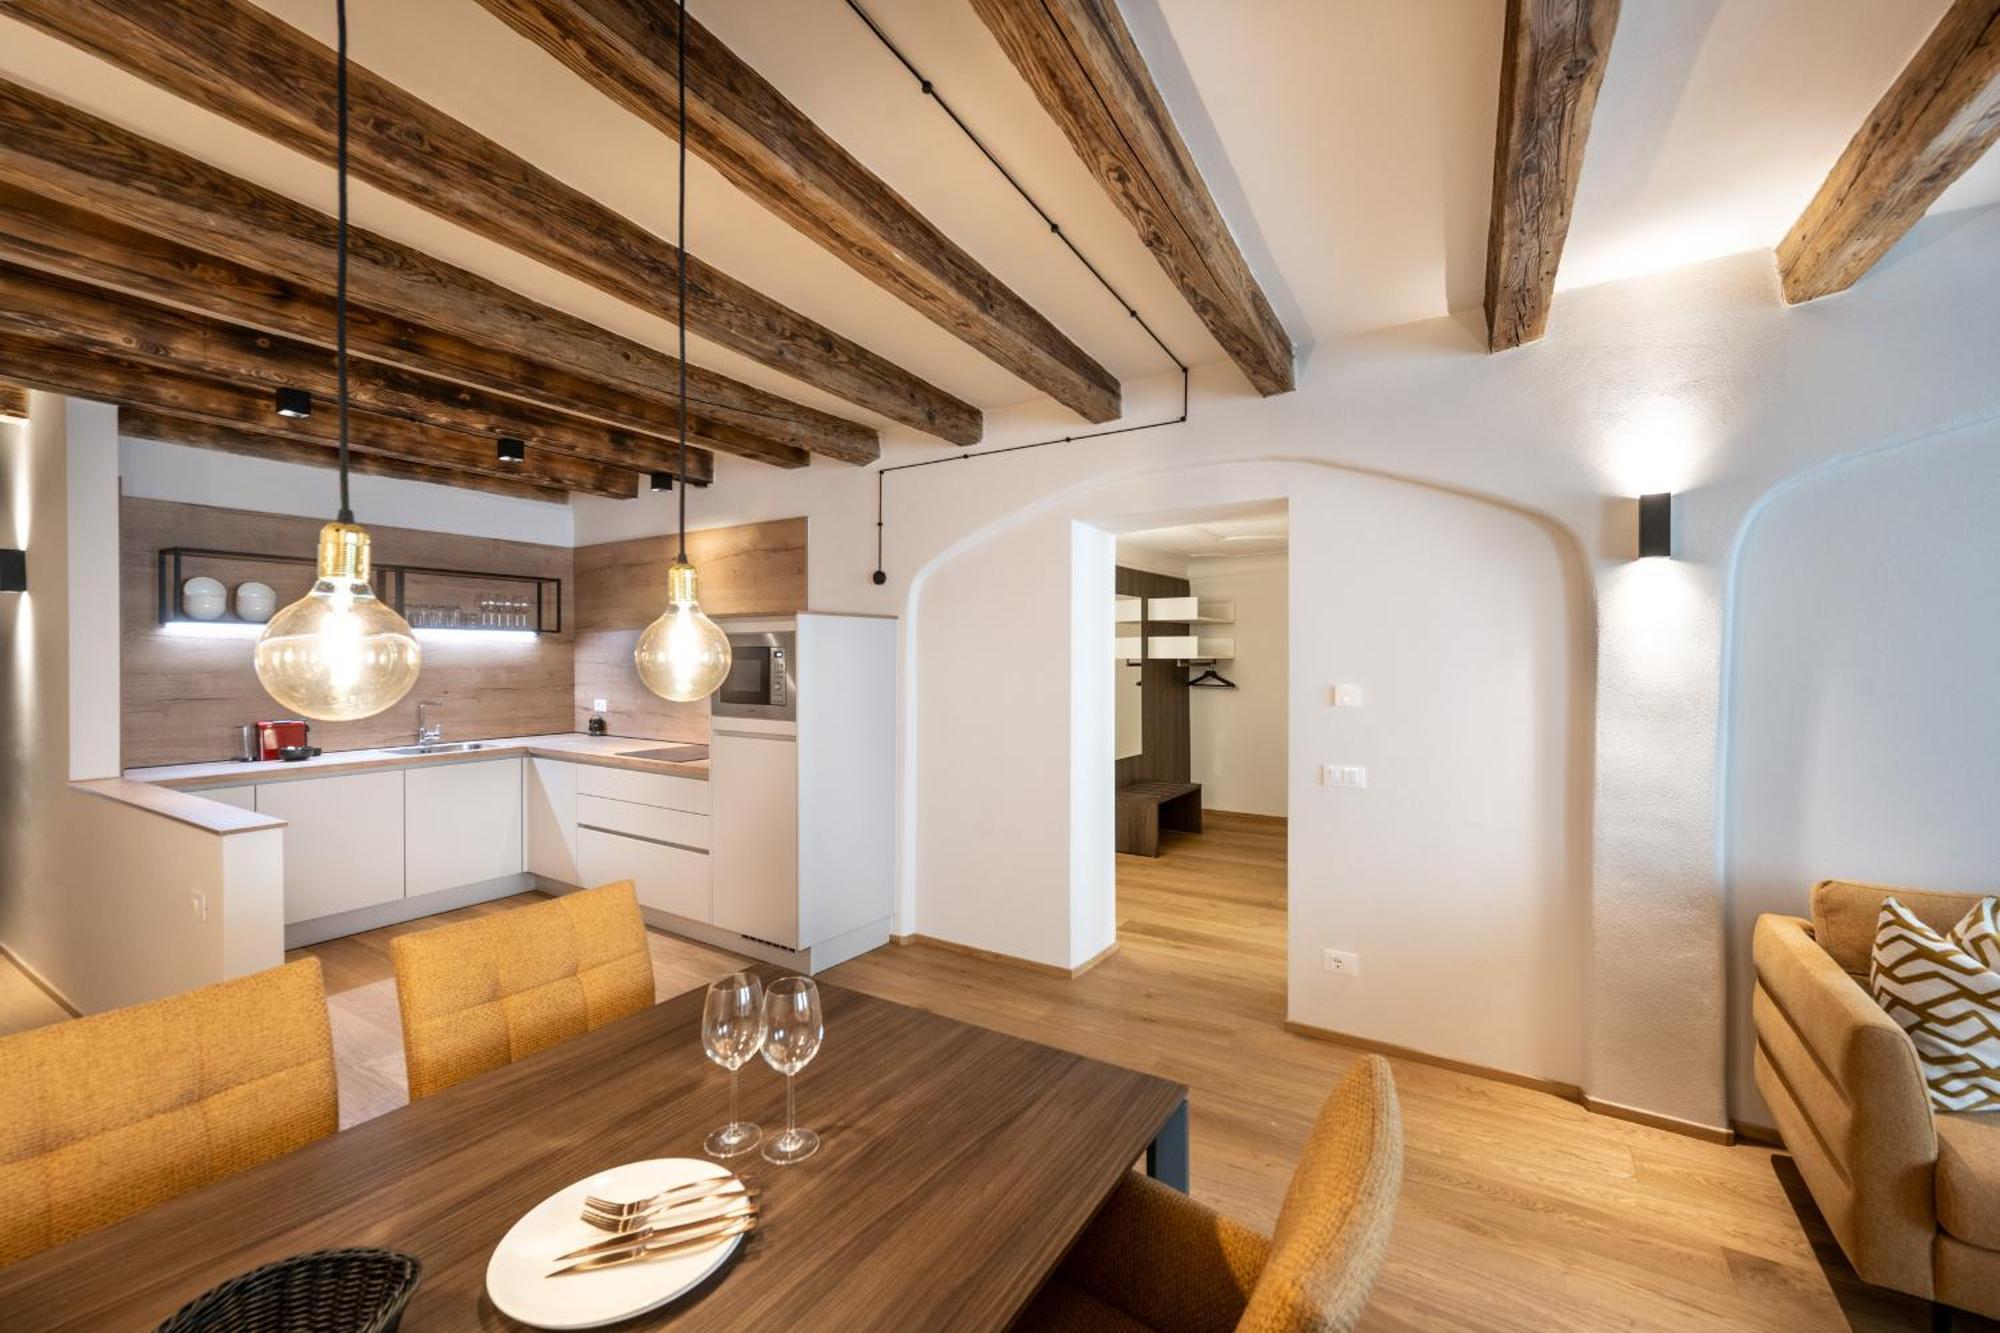 Odilia - Historic City Apartments - Center Of Brixen, Wlan And Brixencard Included Bagian luar foto